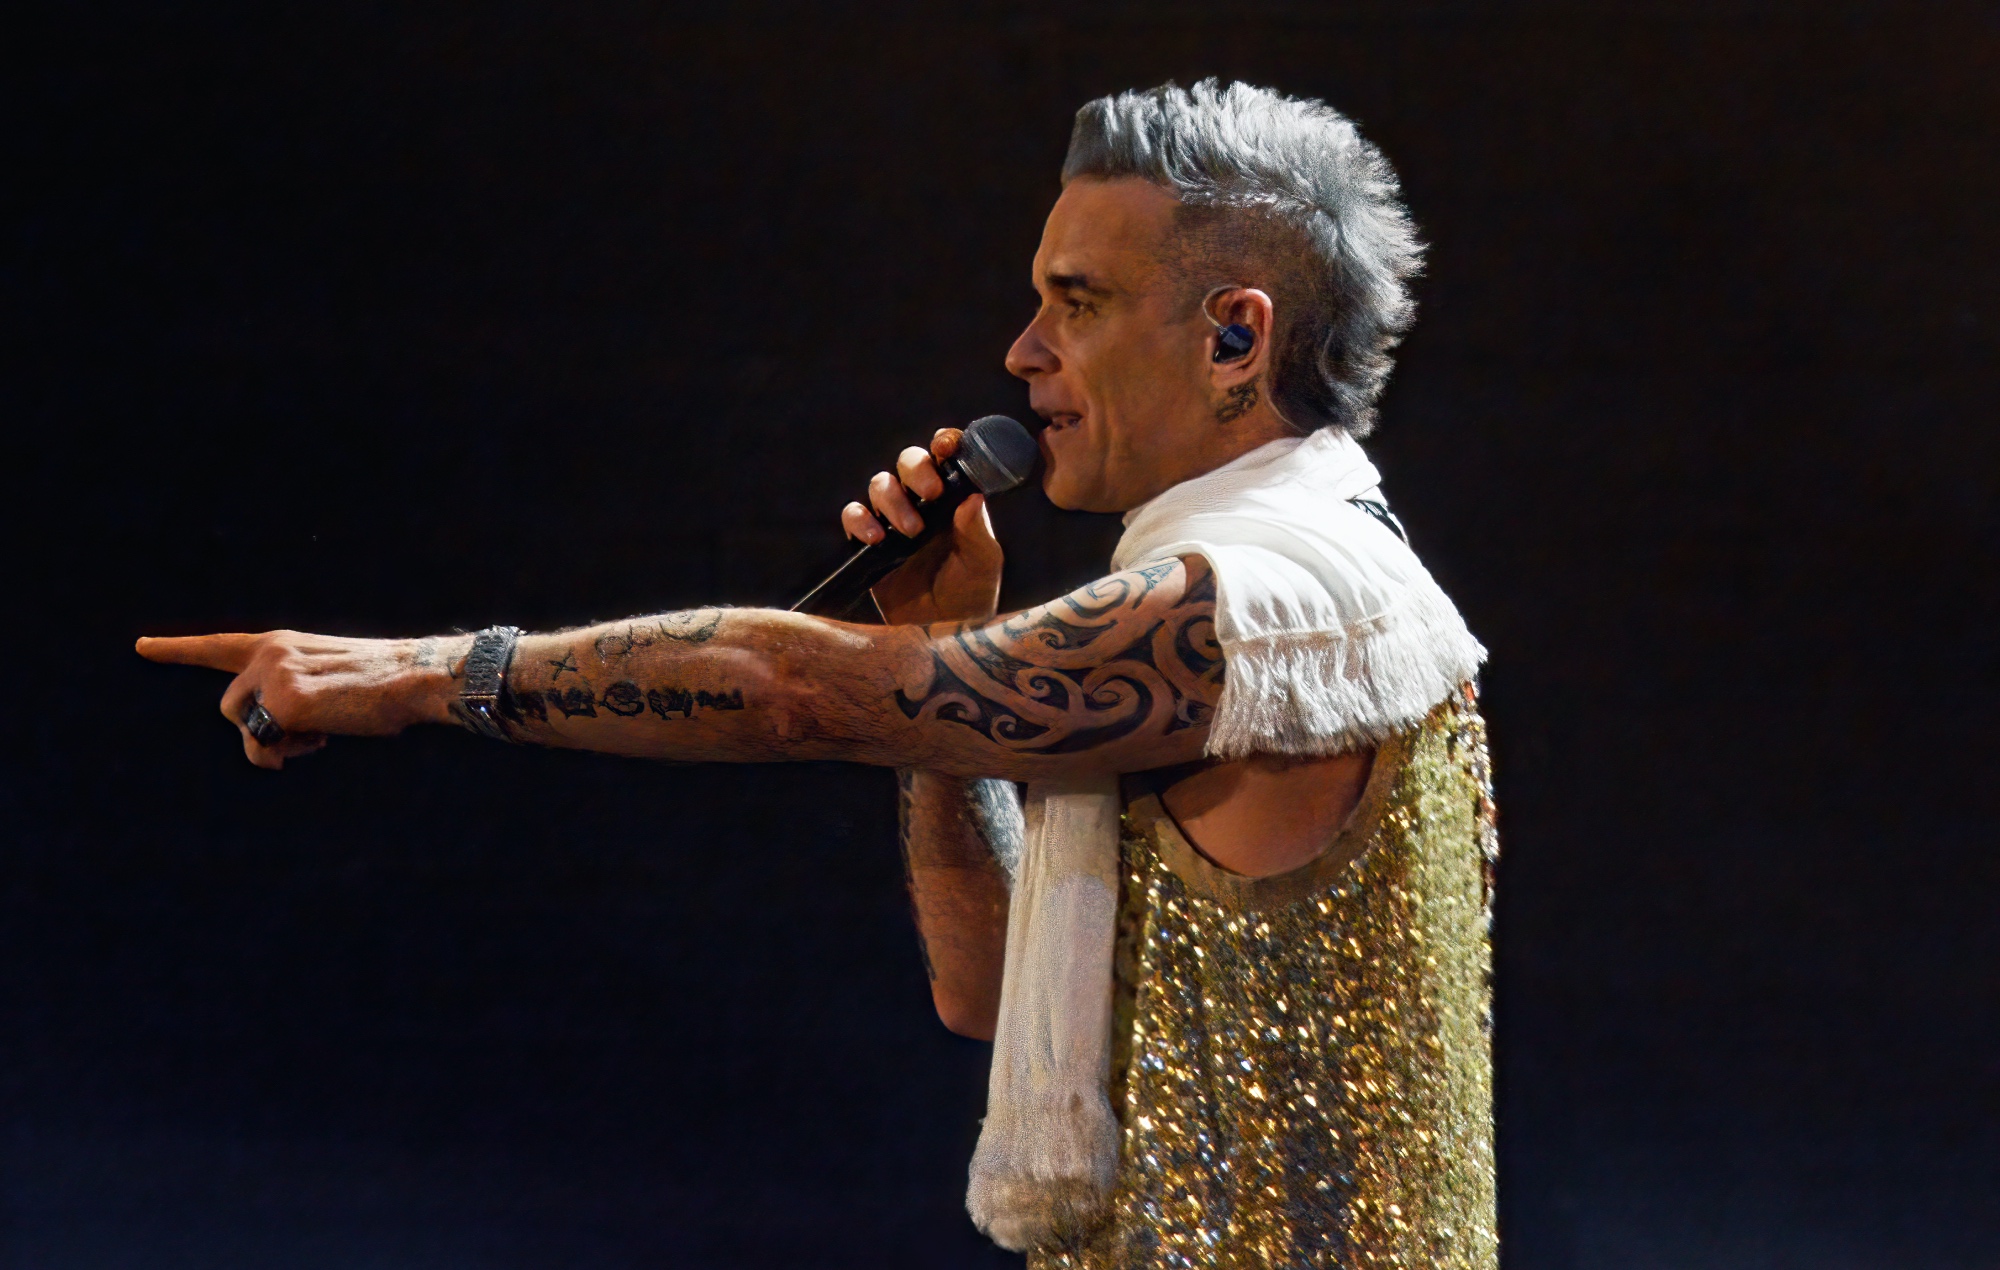 A Robbie Williams pop-up event is coming to London